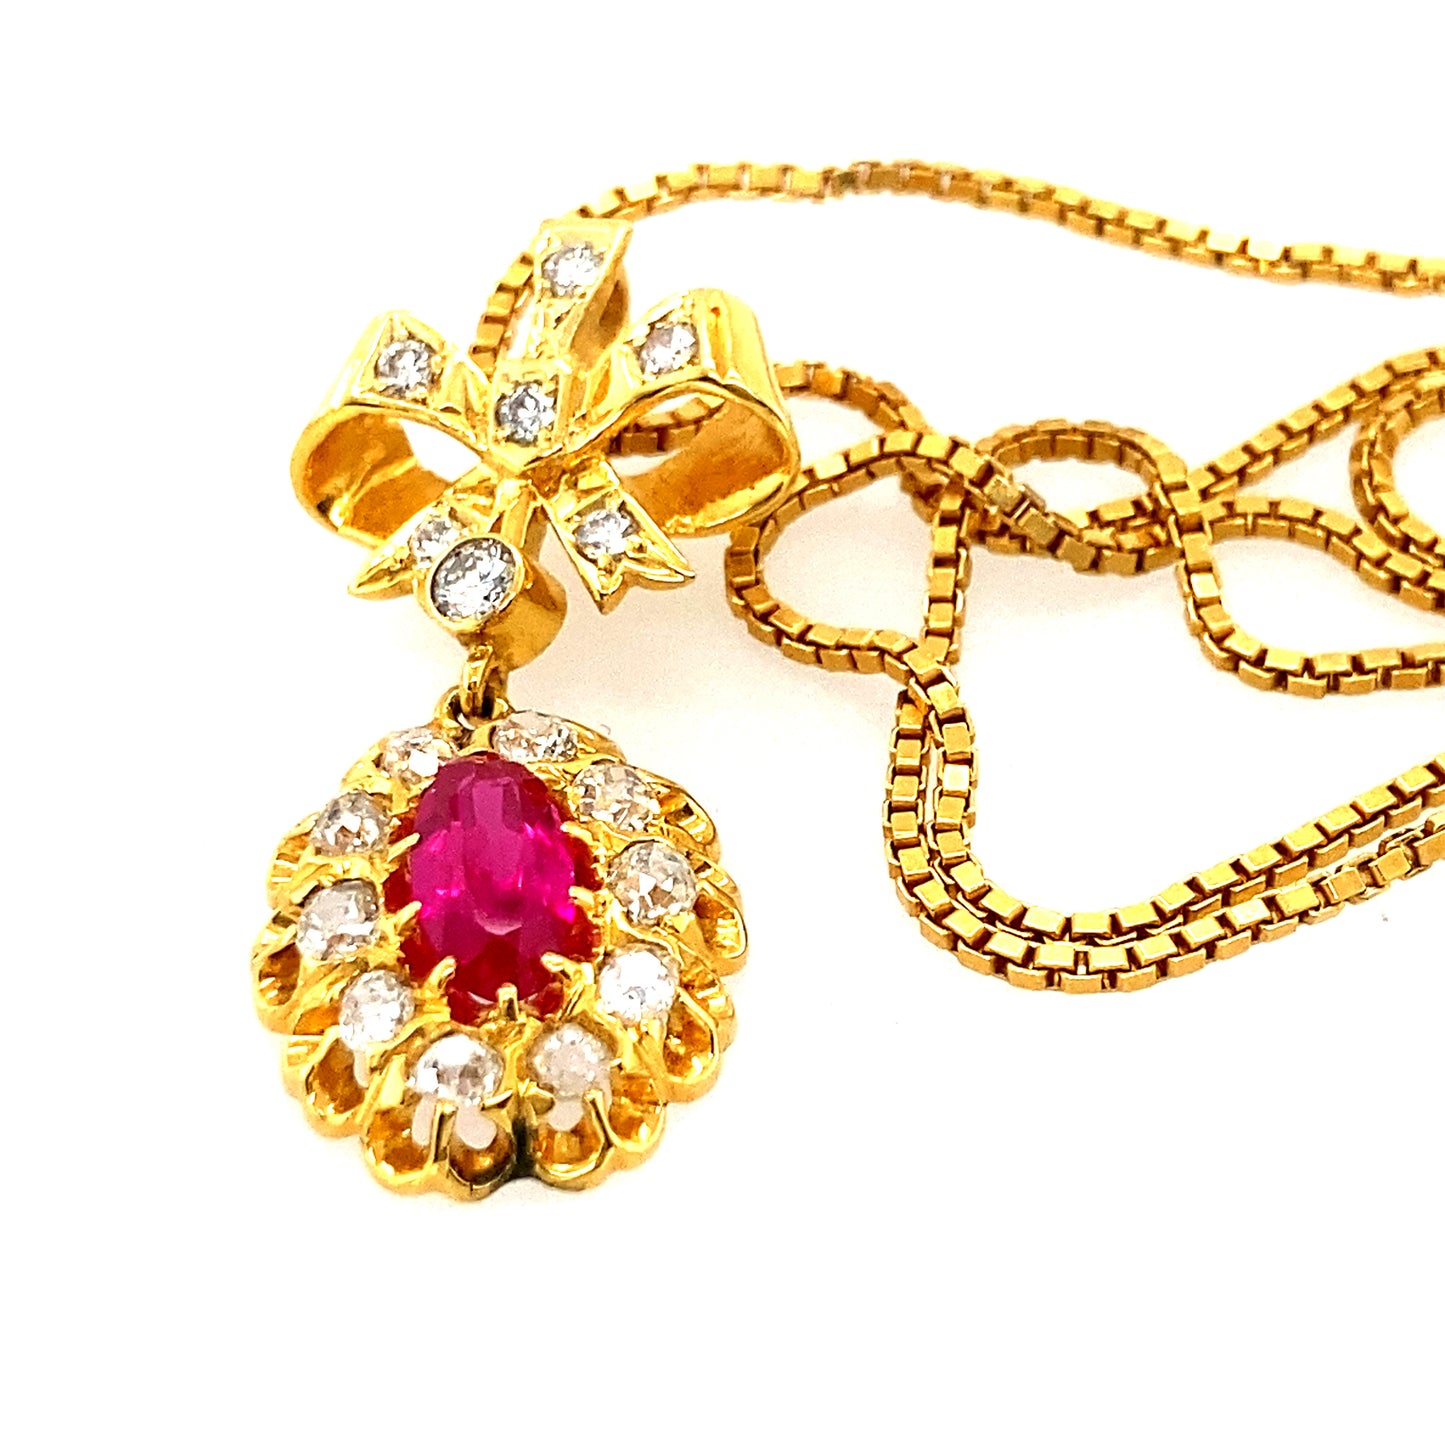 14k yellow gold chain with 14k Ruby Diamond pendant with pretty bow.